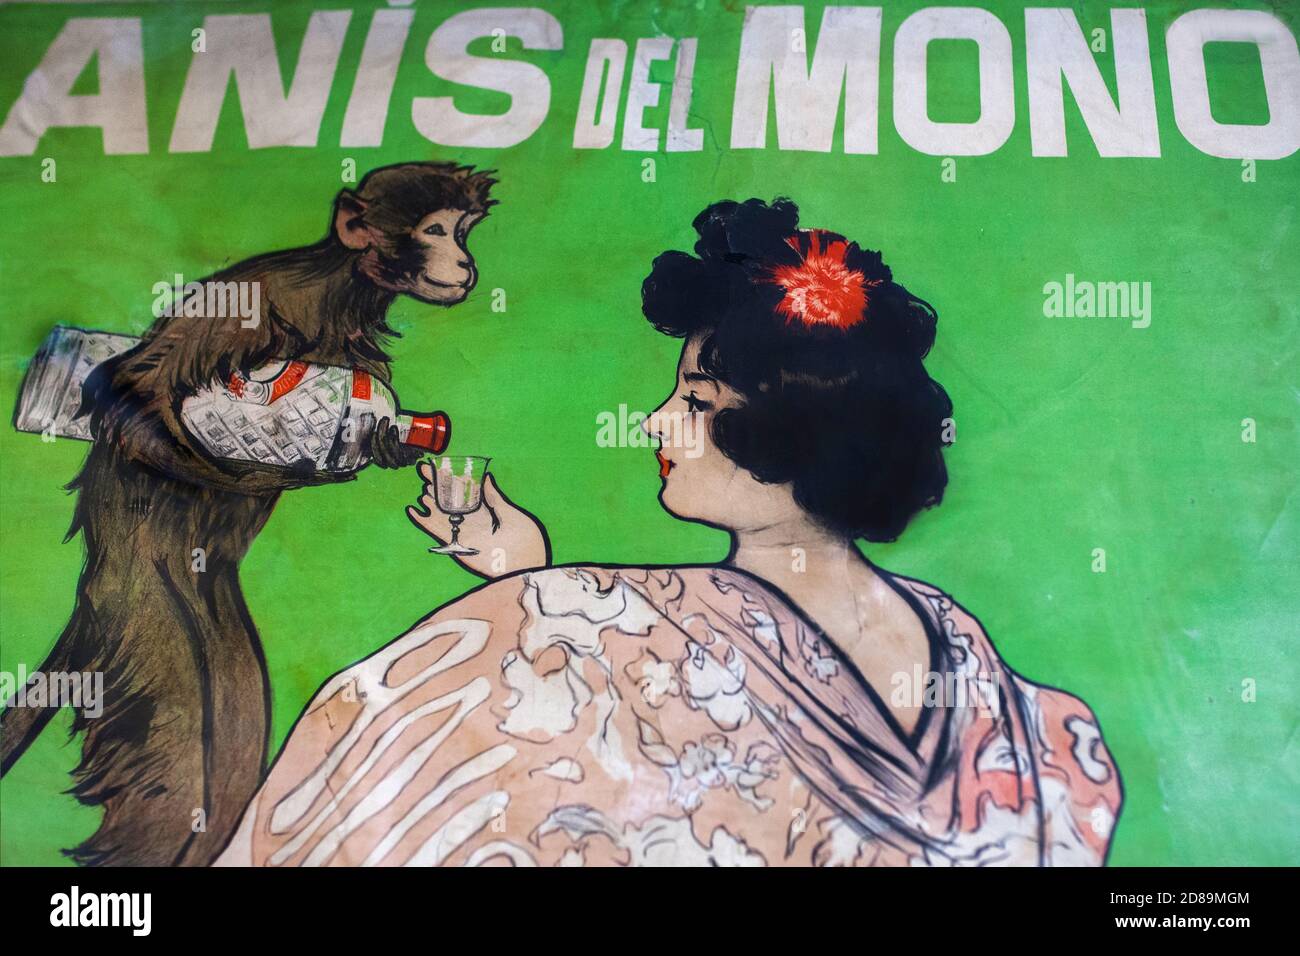 Barcelona, Spain - Dec 26th 2019: Poster of Anis del Mono, In a pressed percale skirt. Designed by Ramon Casas in 1998. Detail. National Art Museum of Stock Photo